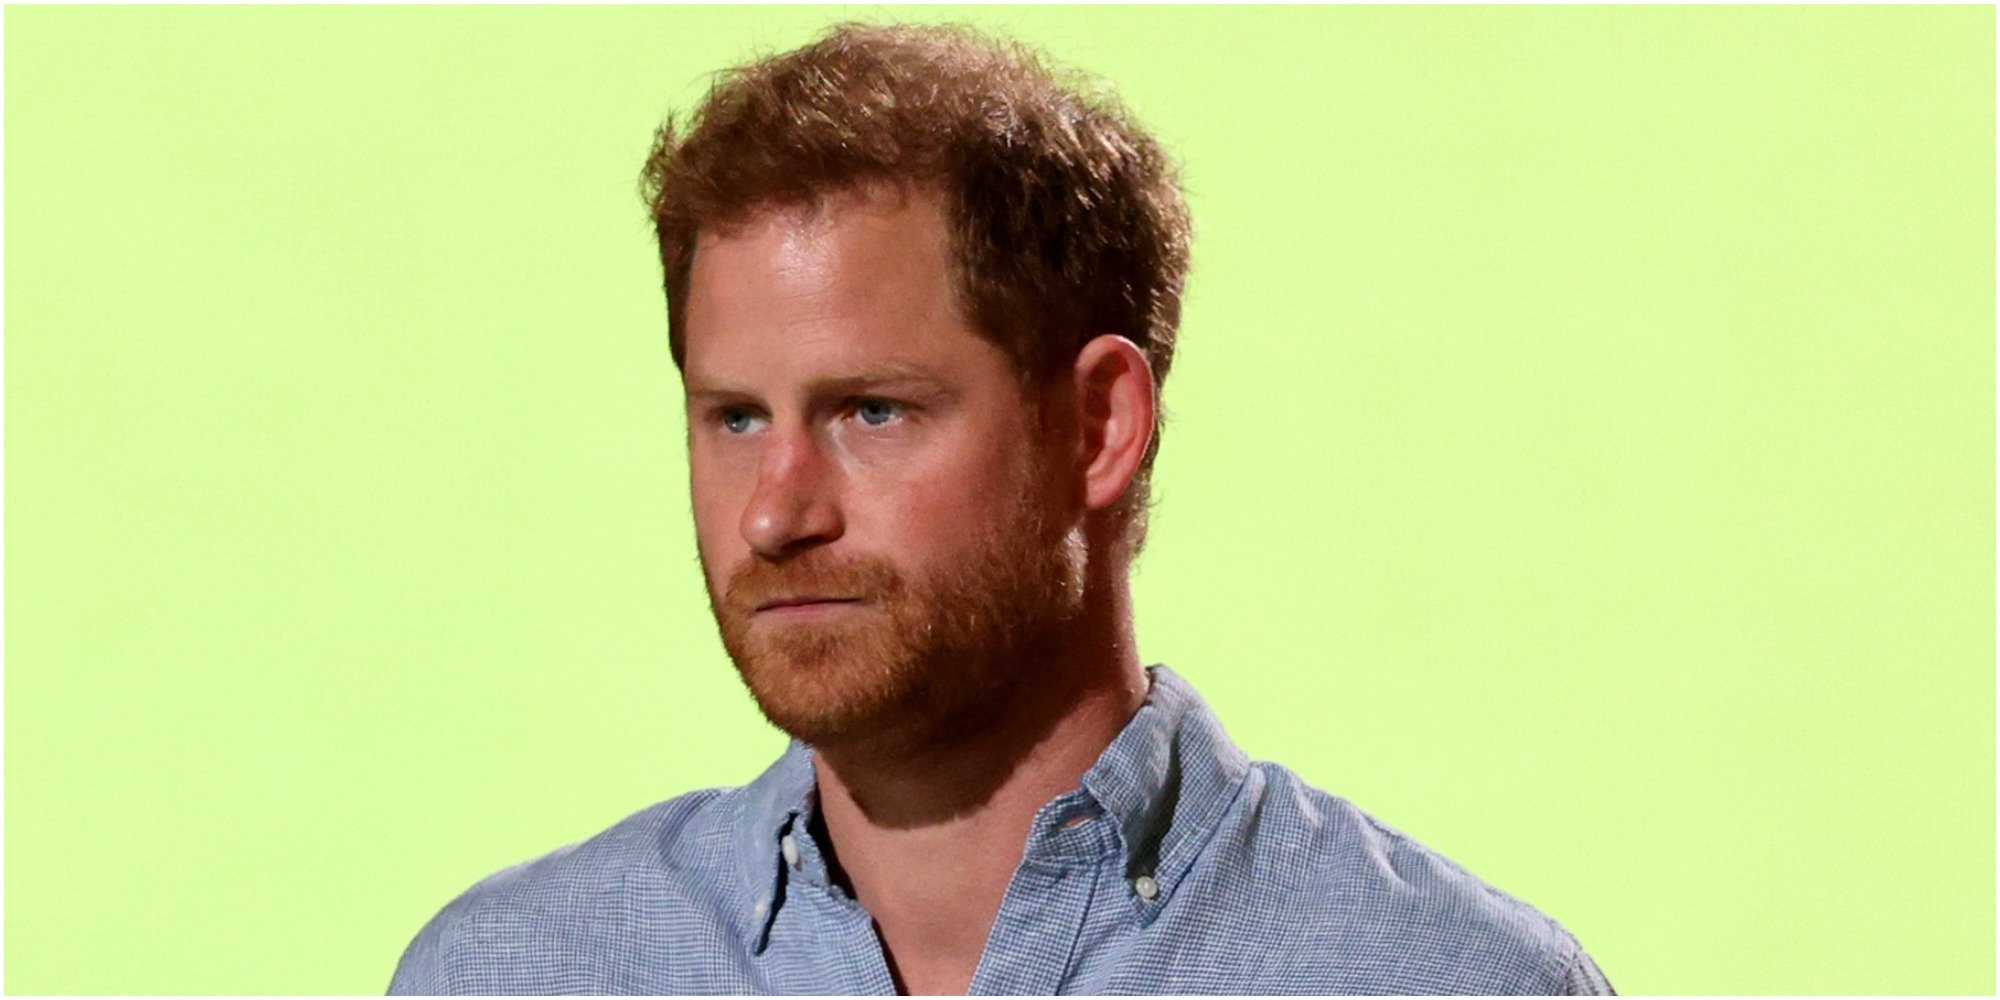 Prince Harry wears a blue shirt and stands in front of a yellow backdrop.